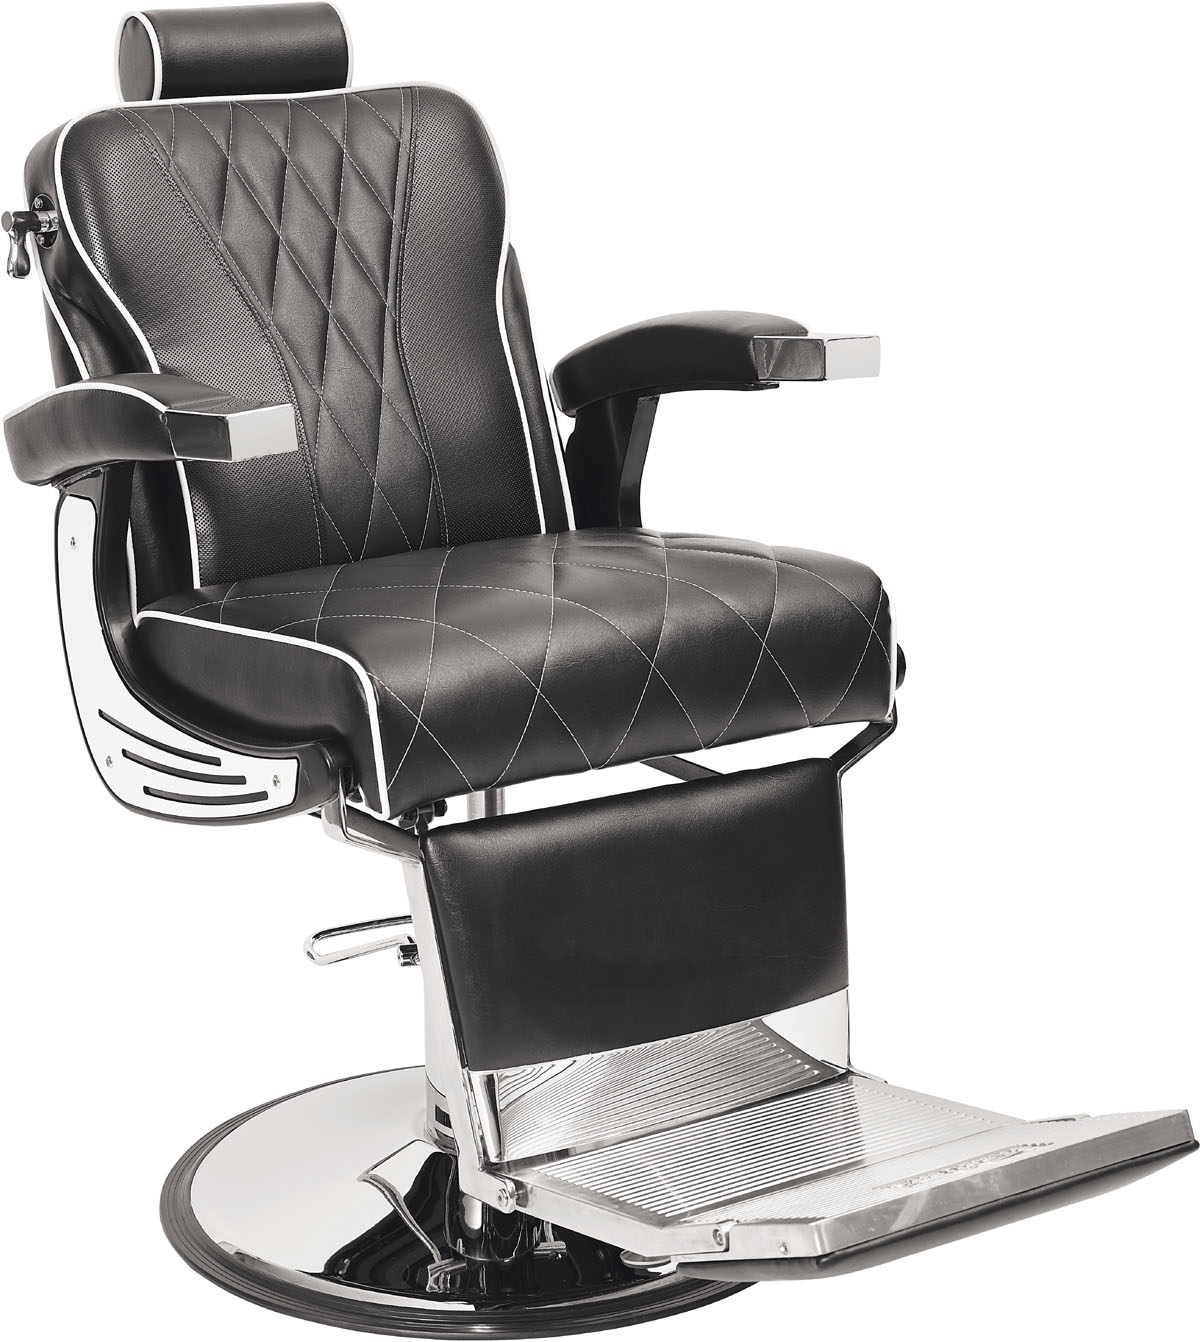  Barburys Aston Barber Chair Black with White Stitching 